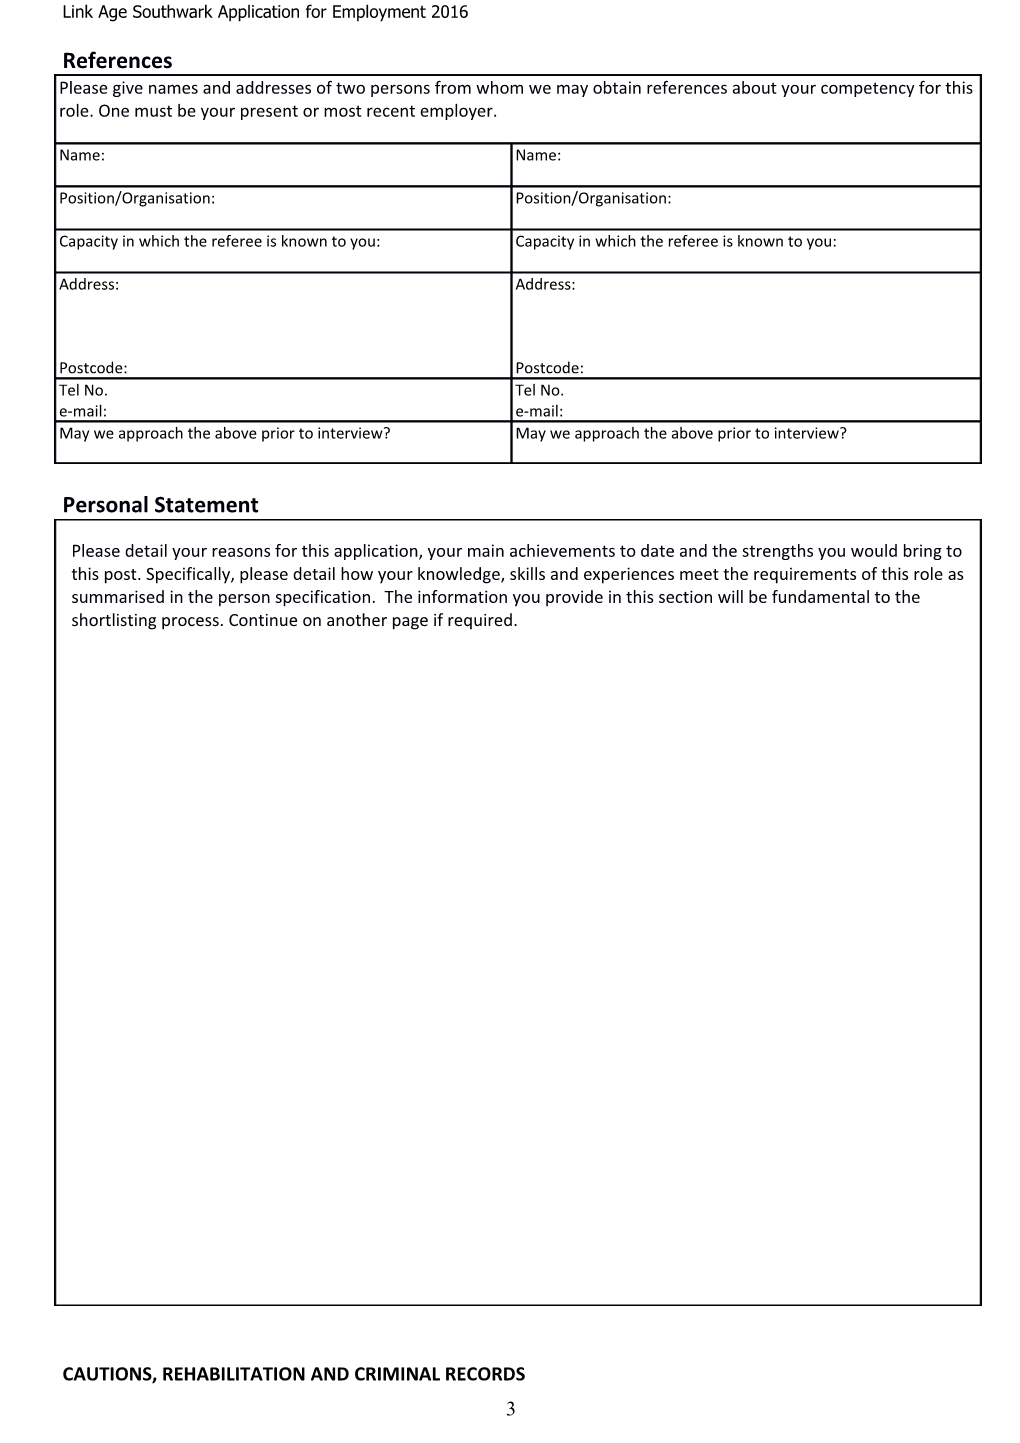 Application for Employment s110